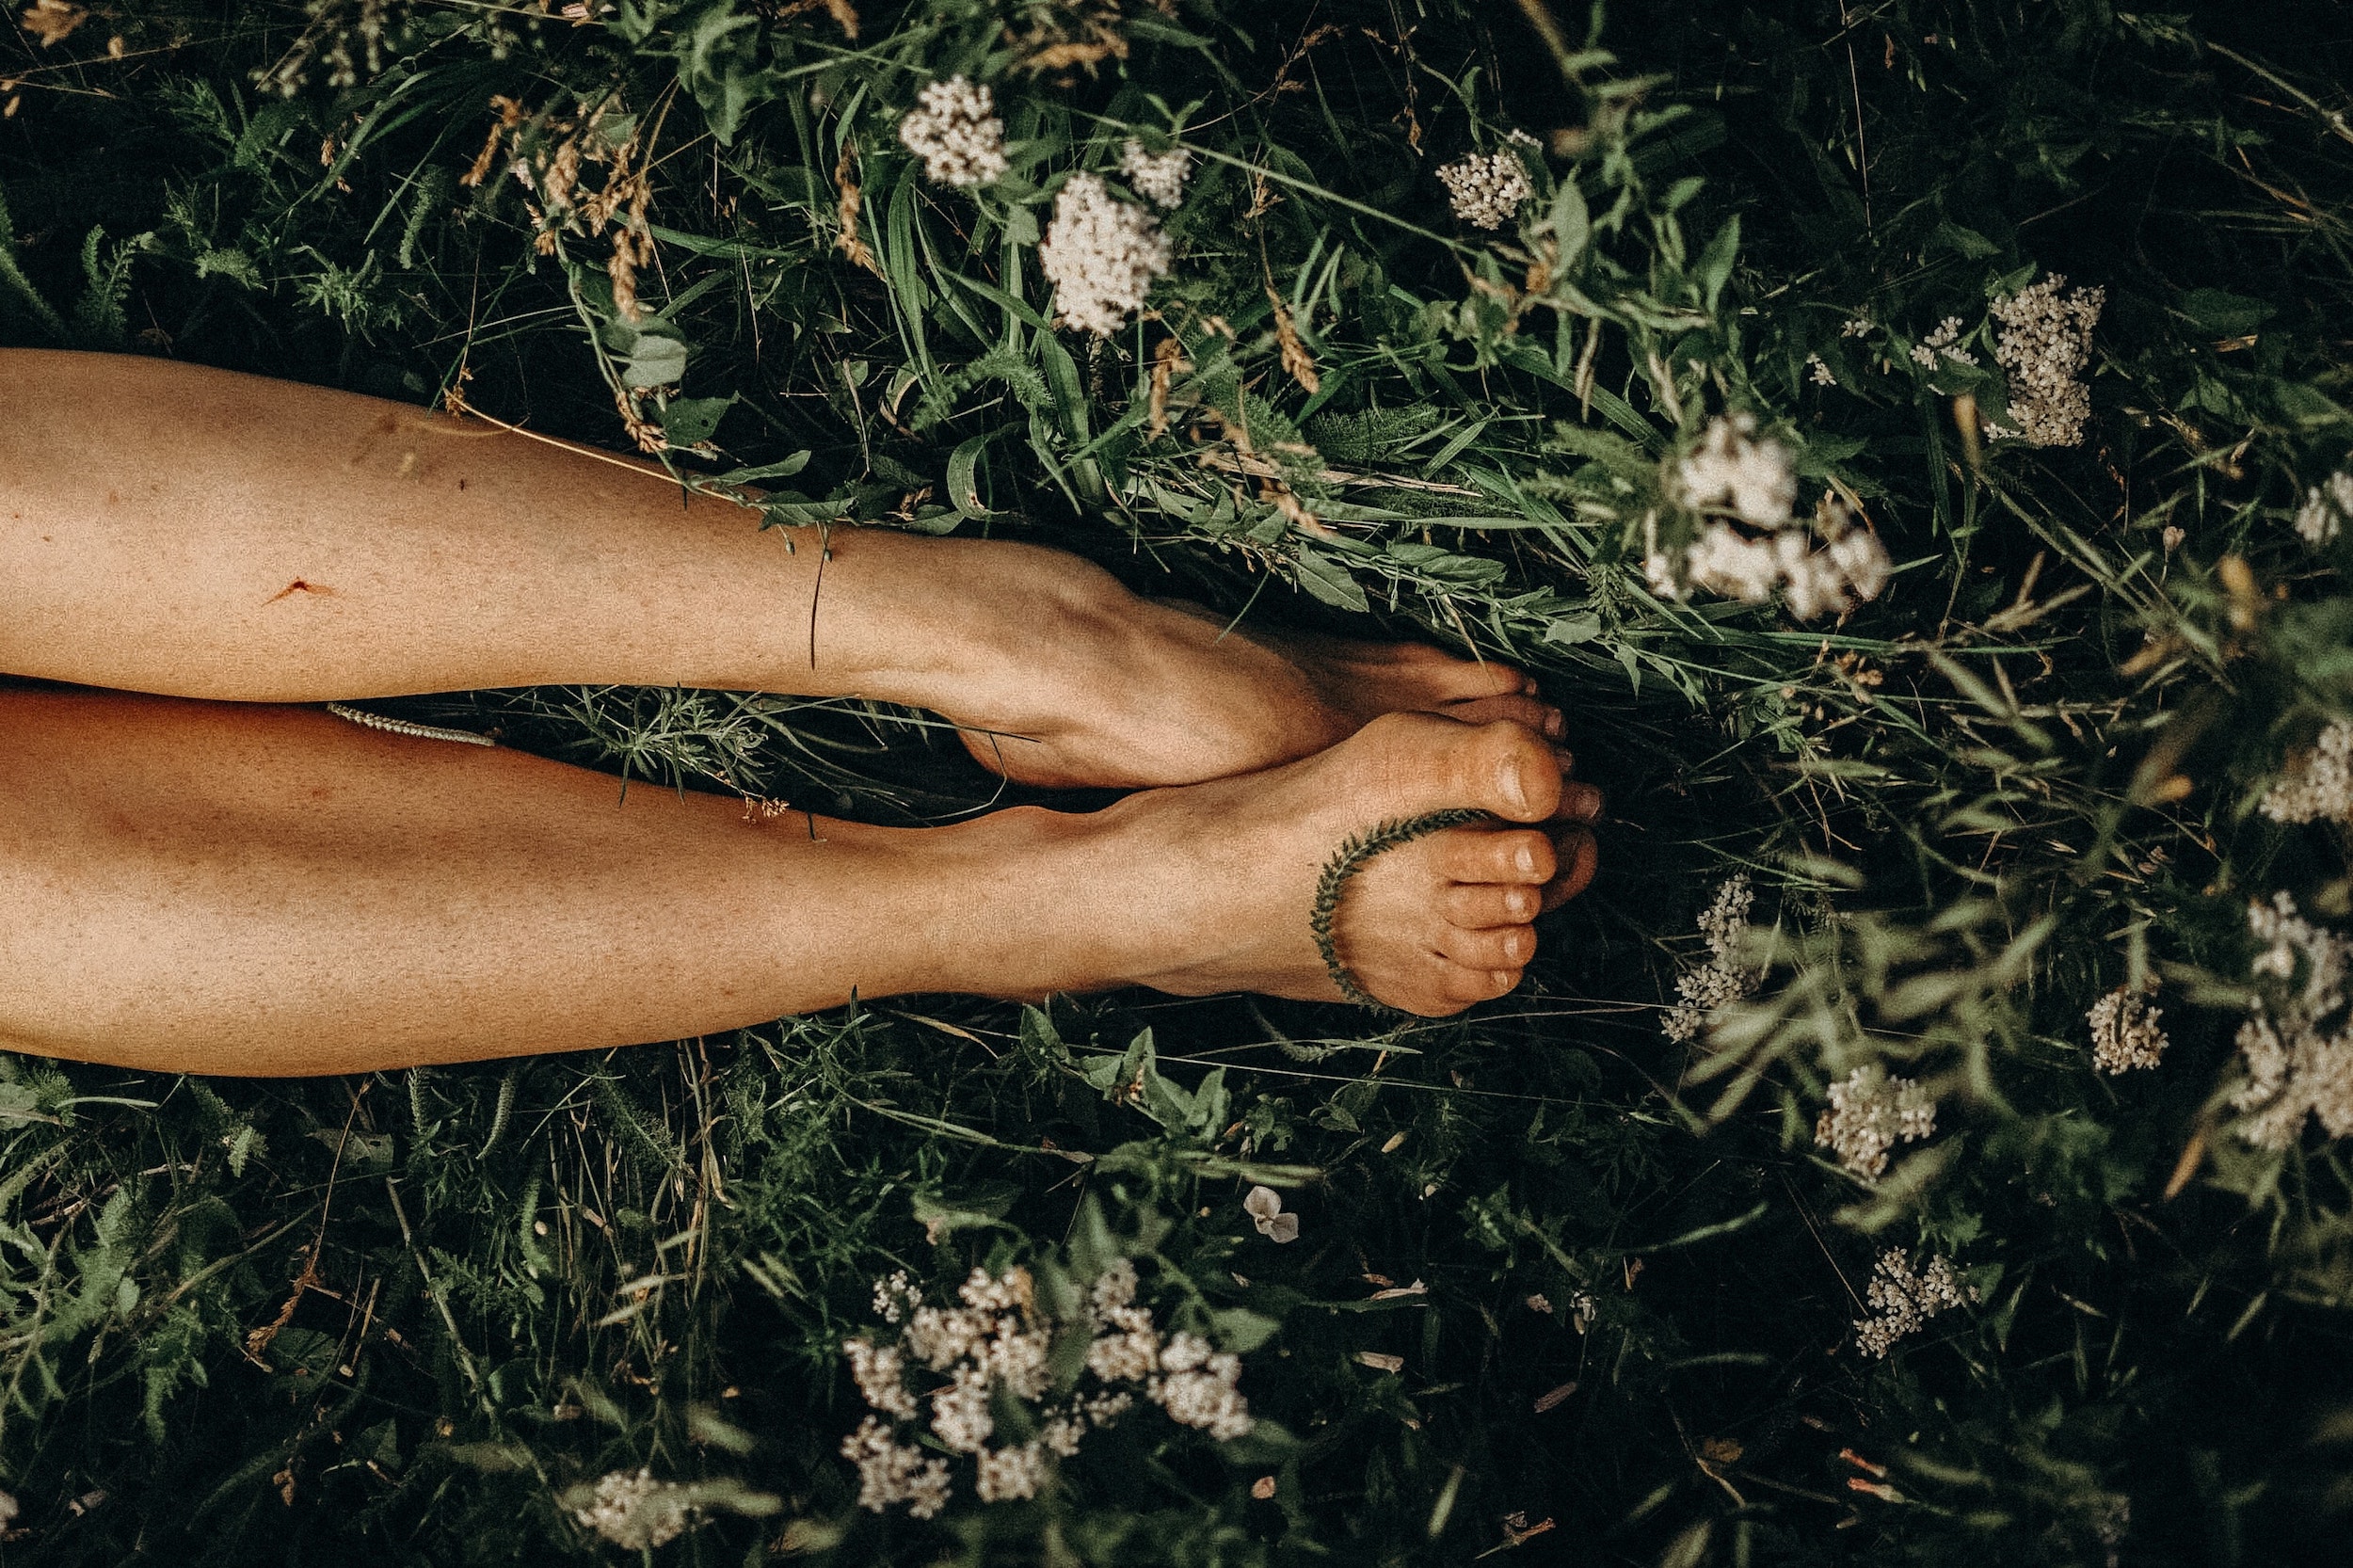 Feel the earth beneath your feet – the benefits of Barefoot